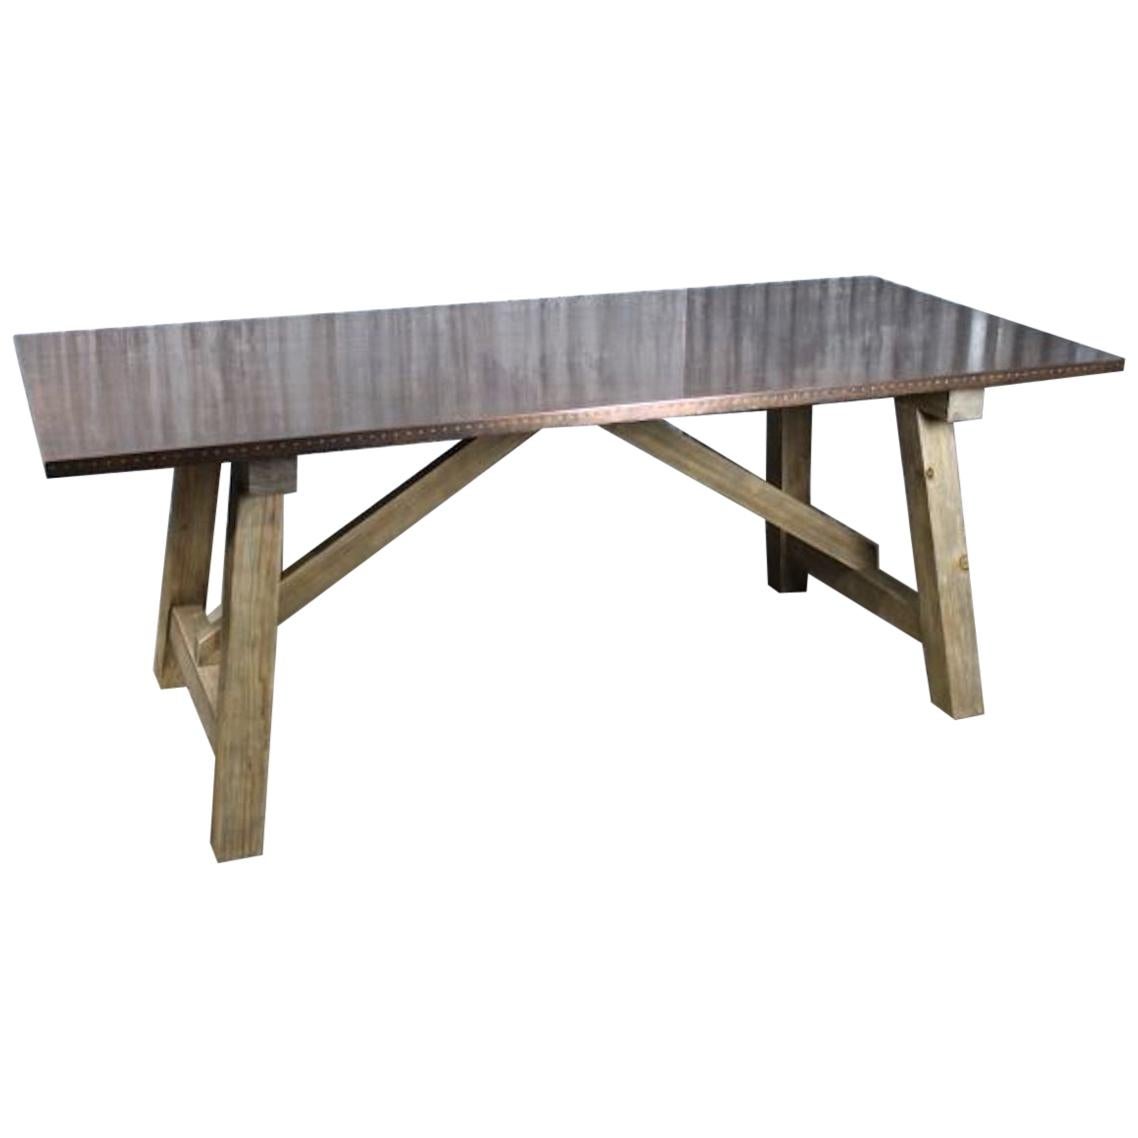 Malaga Zinc and Copper Dining Table Range, 20th Century For Sale